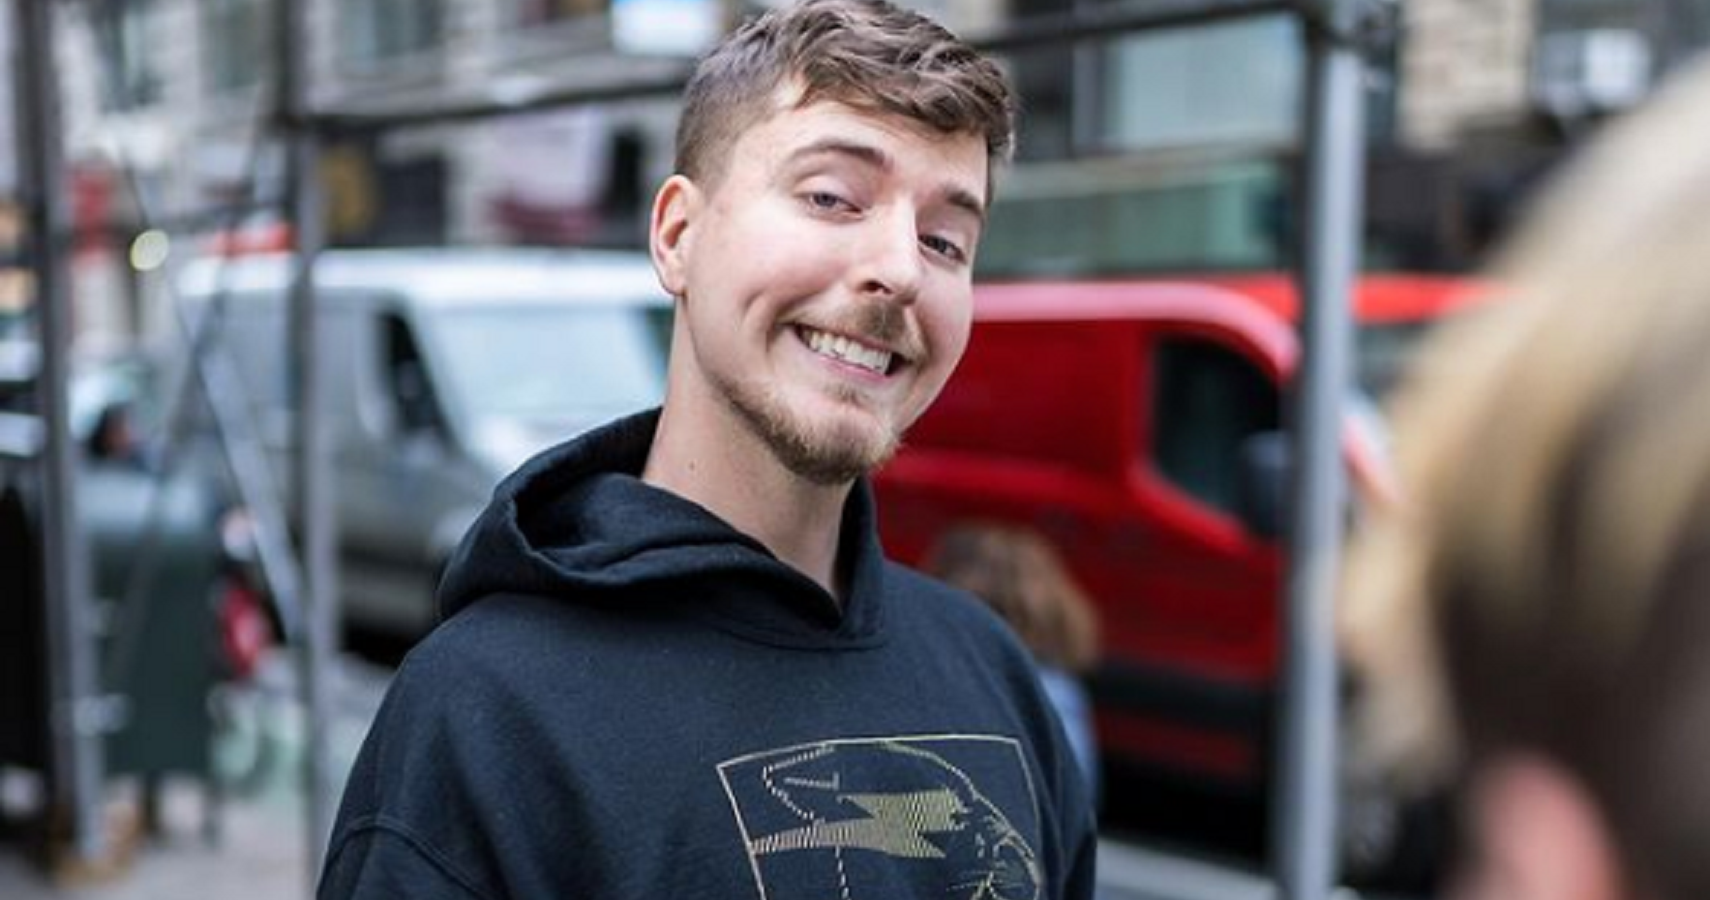 Mr Beast net worth 2022: 's most subscribed creator not PewDiePie  anymore - Beem